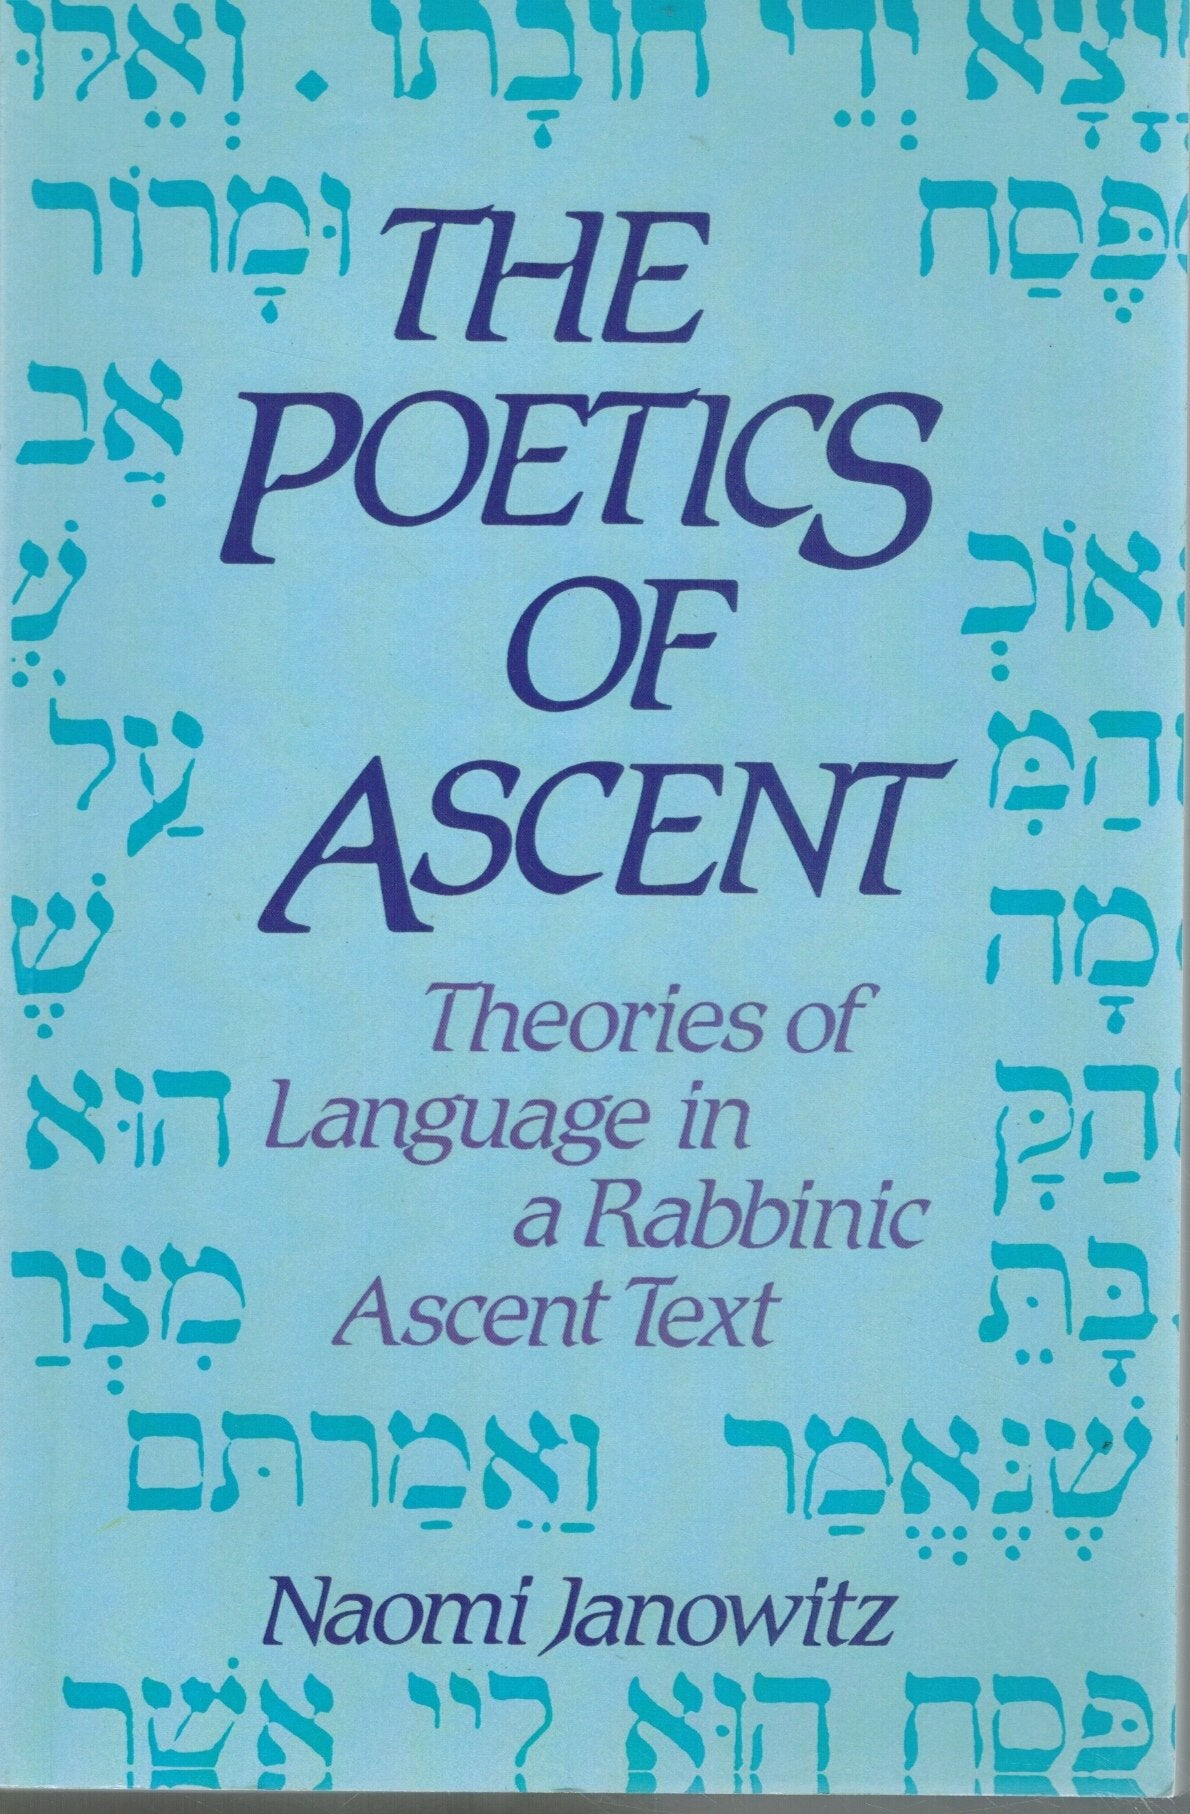 THE POETICS OF ASCENT Theories of Language in a Rabbinic Ascent Text (Suny  Series in Judaica: Hermeneutics, Mysticism, and Religion)  by Janowitz, Naomi